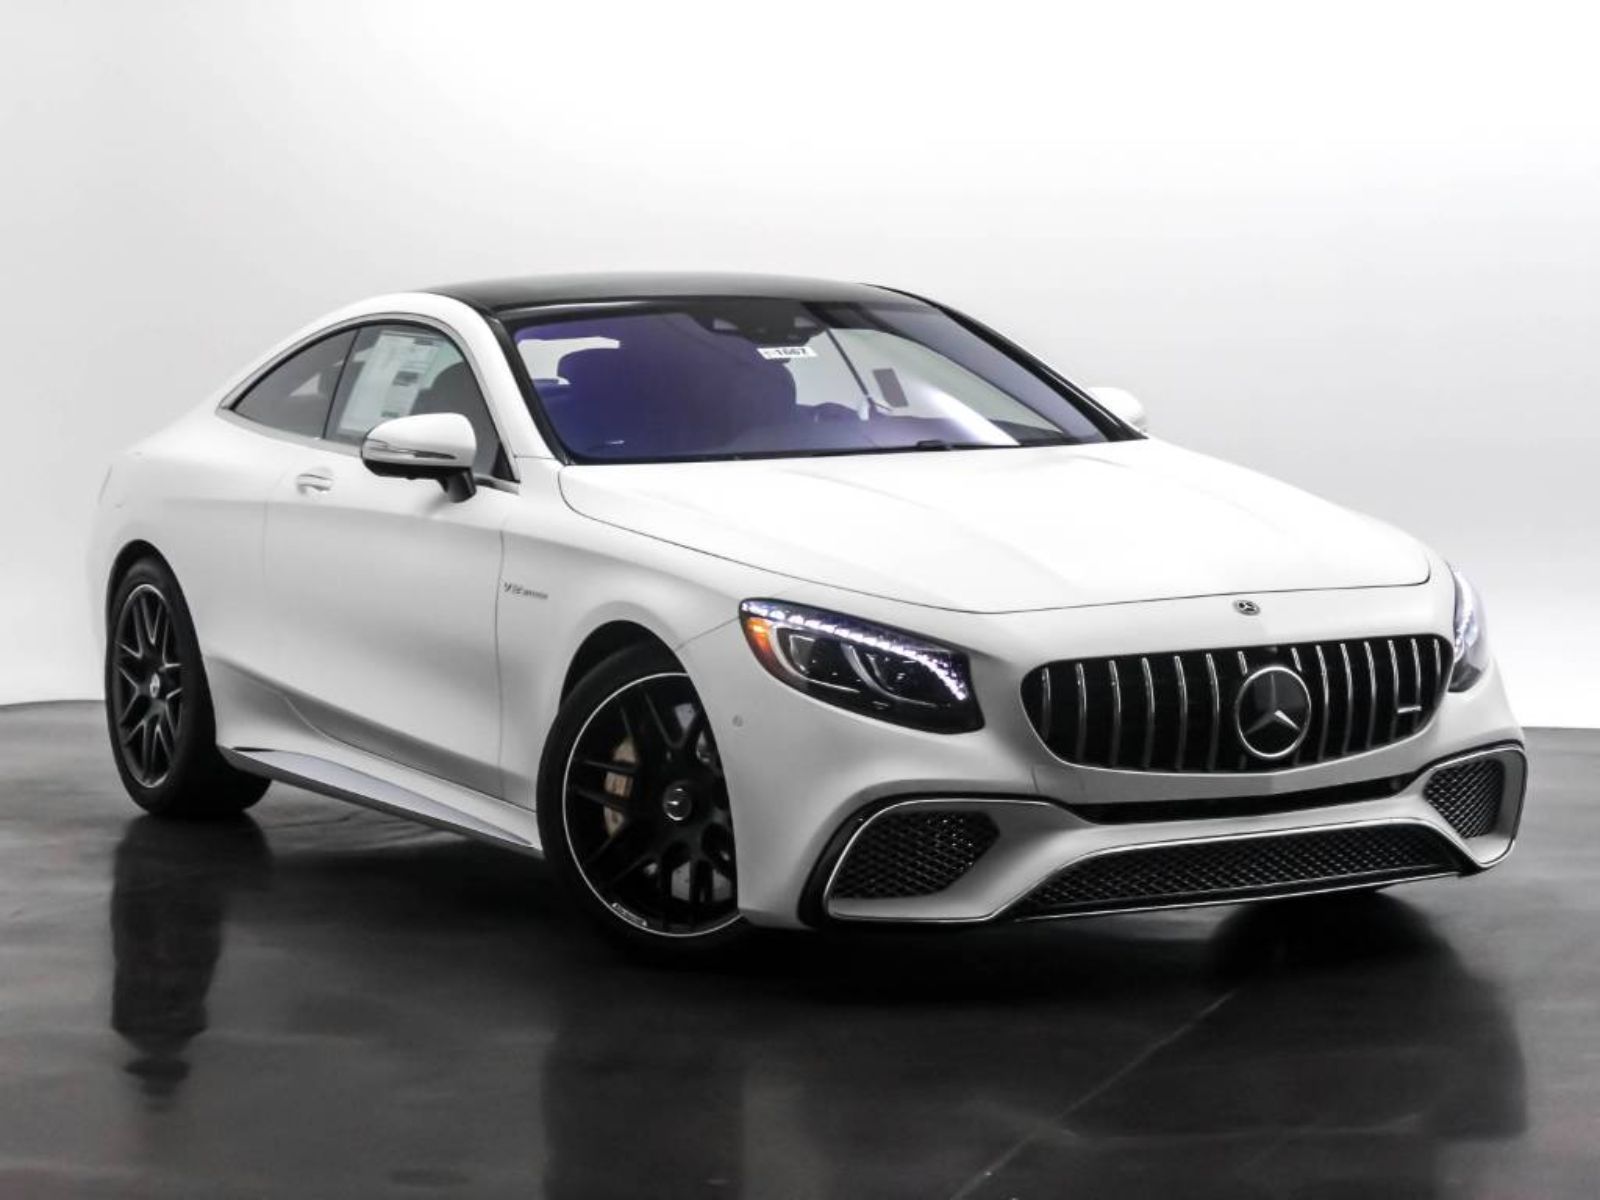 New 2019 Mercedes Benz S Class Amg S 65 Rear Wheel Drive Coupe